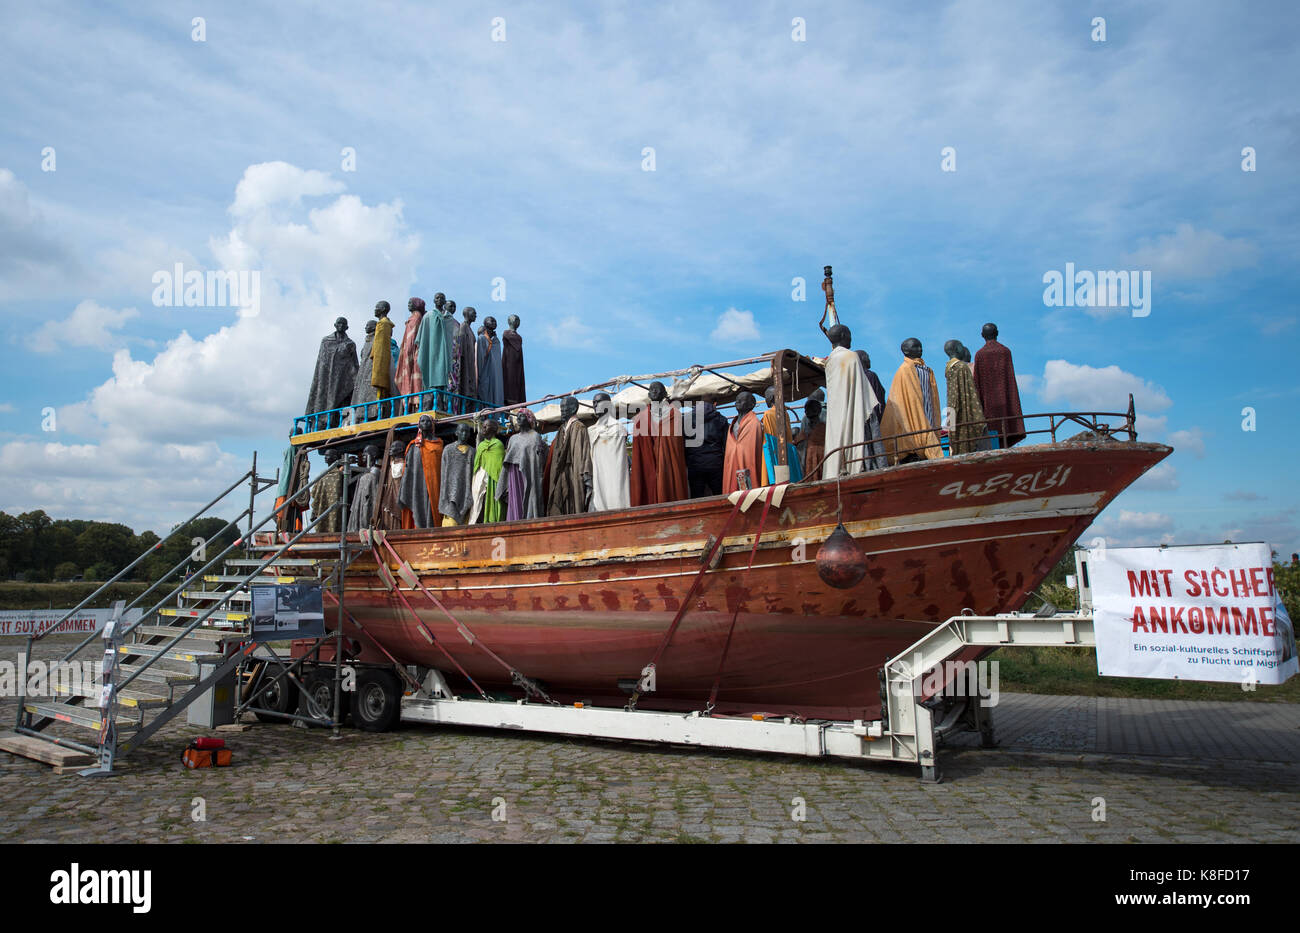 Dresden, Germany. 19th Sep, 2017. Copper figures of the Danish artist Jens Galschiøt can be seen for the project 'Mit Sicherheit gut ankommen' (lit. 'To arrive with security') on board of the former refugee boat 'Al-hadj Djumaa' at the river Elbe in Dresden, Germany, 19 September 2017. The 80 figures are supposed to represent refugees. Credit: Monika Skolimowska/dpa-Zentralbild/dpa/Alamy Live News Stock Photo